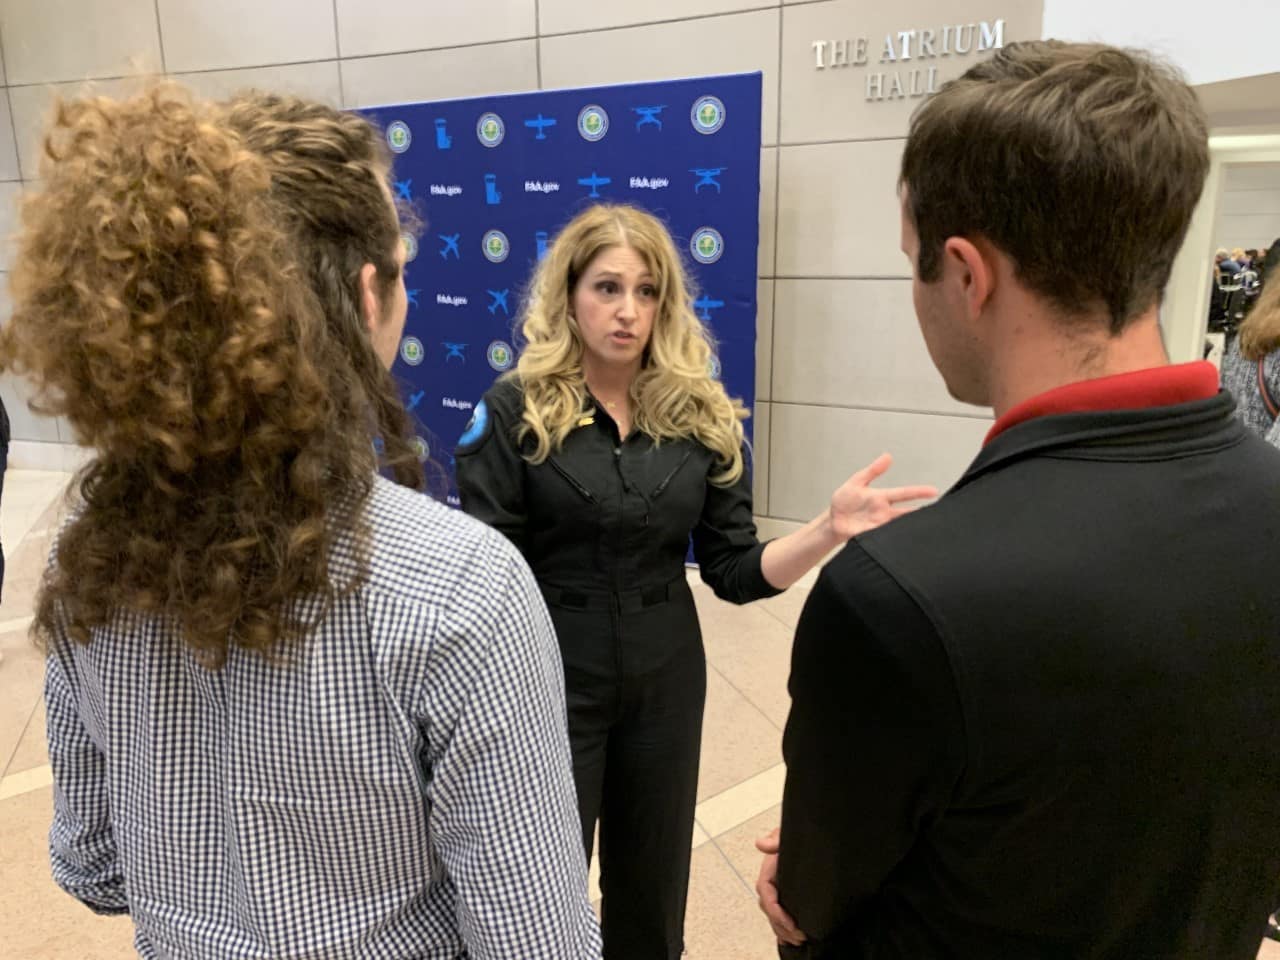 Embry-Riddle students Max Cannon and Noah Eudy meet Virgin Galactic Chief Astronaut Instructor Beth Moses at the 2020 Commercial Space Transportation Conference held in January in Washington, D.C.